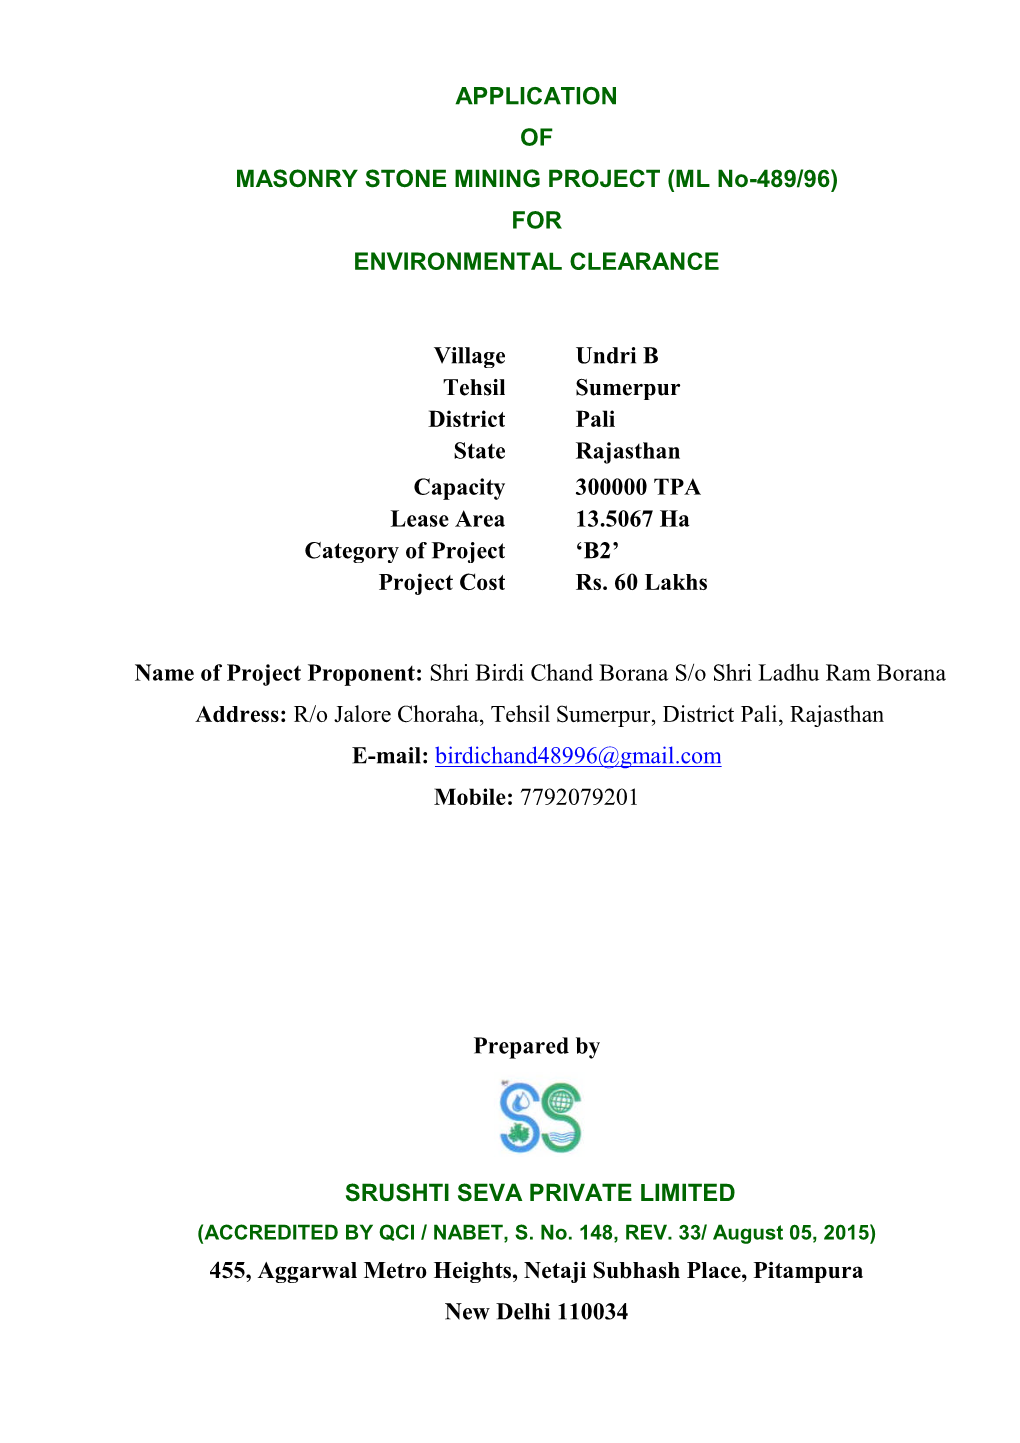 APPLICATION of MASONRY STONE MINING PROJECT (ML No-489/96) for ENVIRONMENTAL CLEARANCE